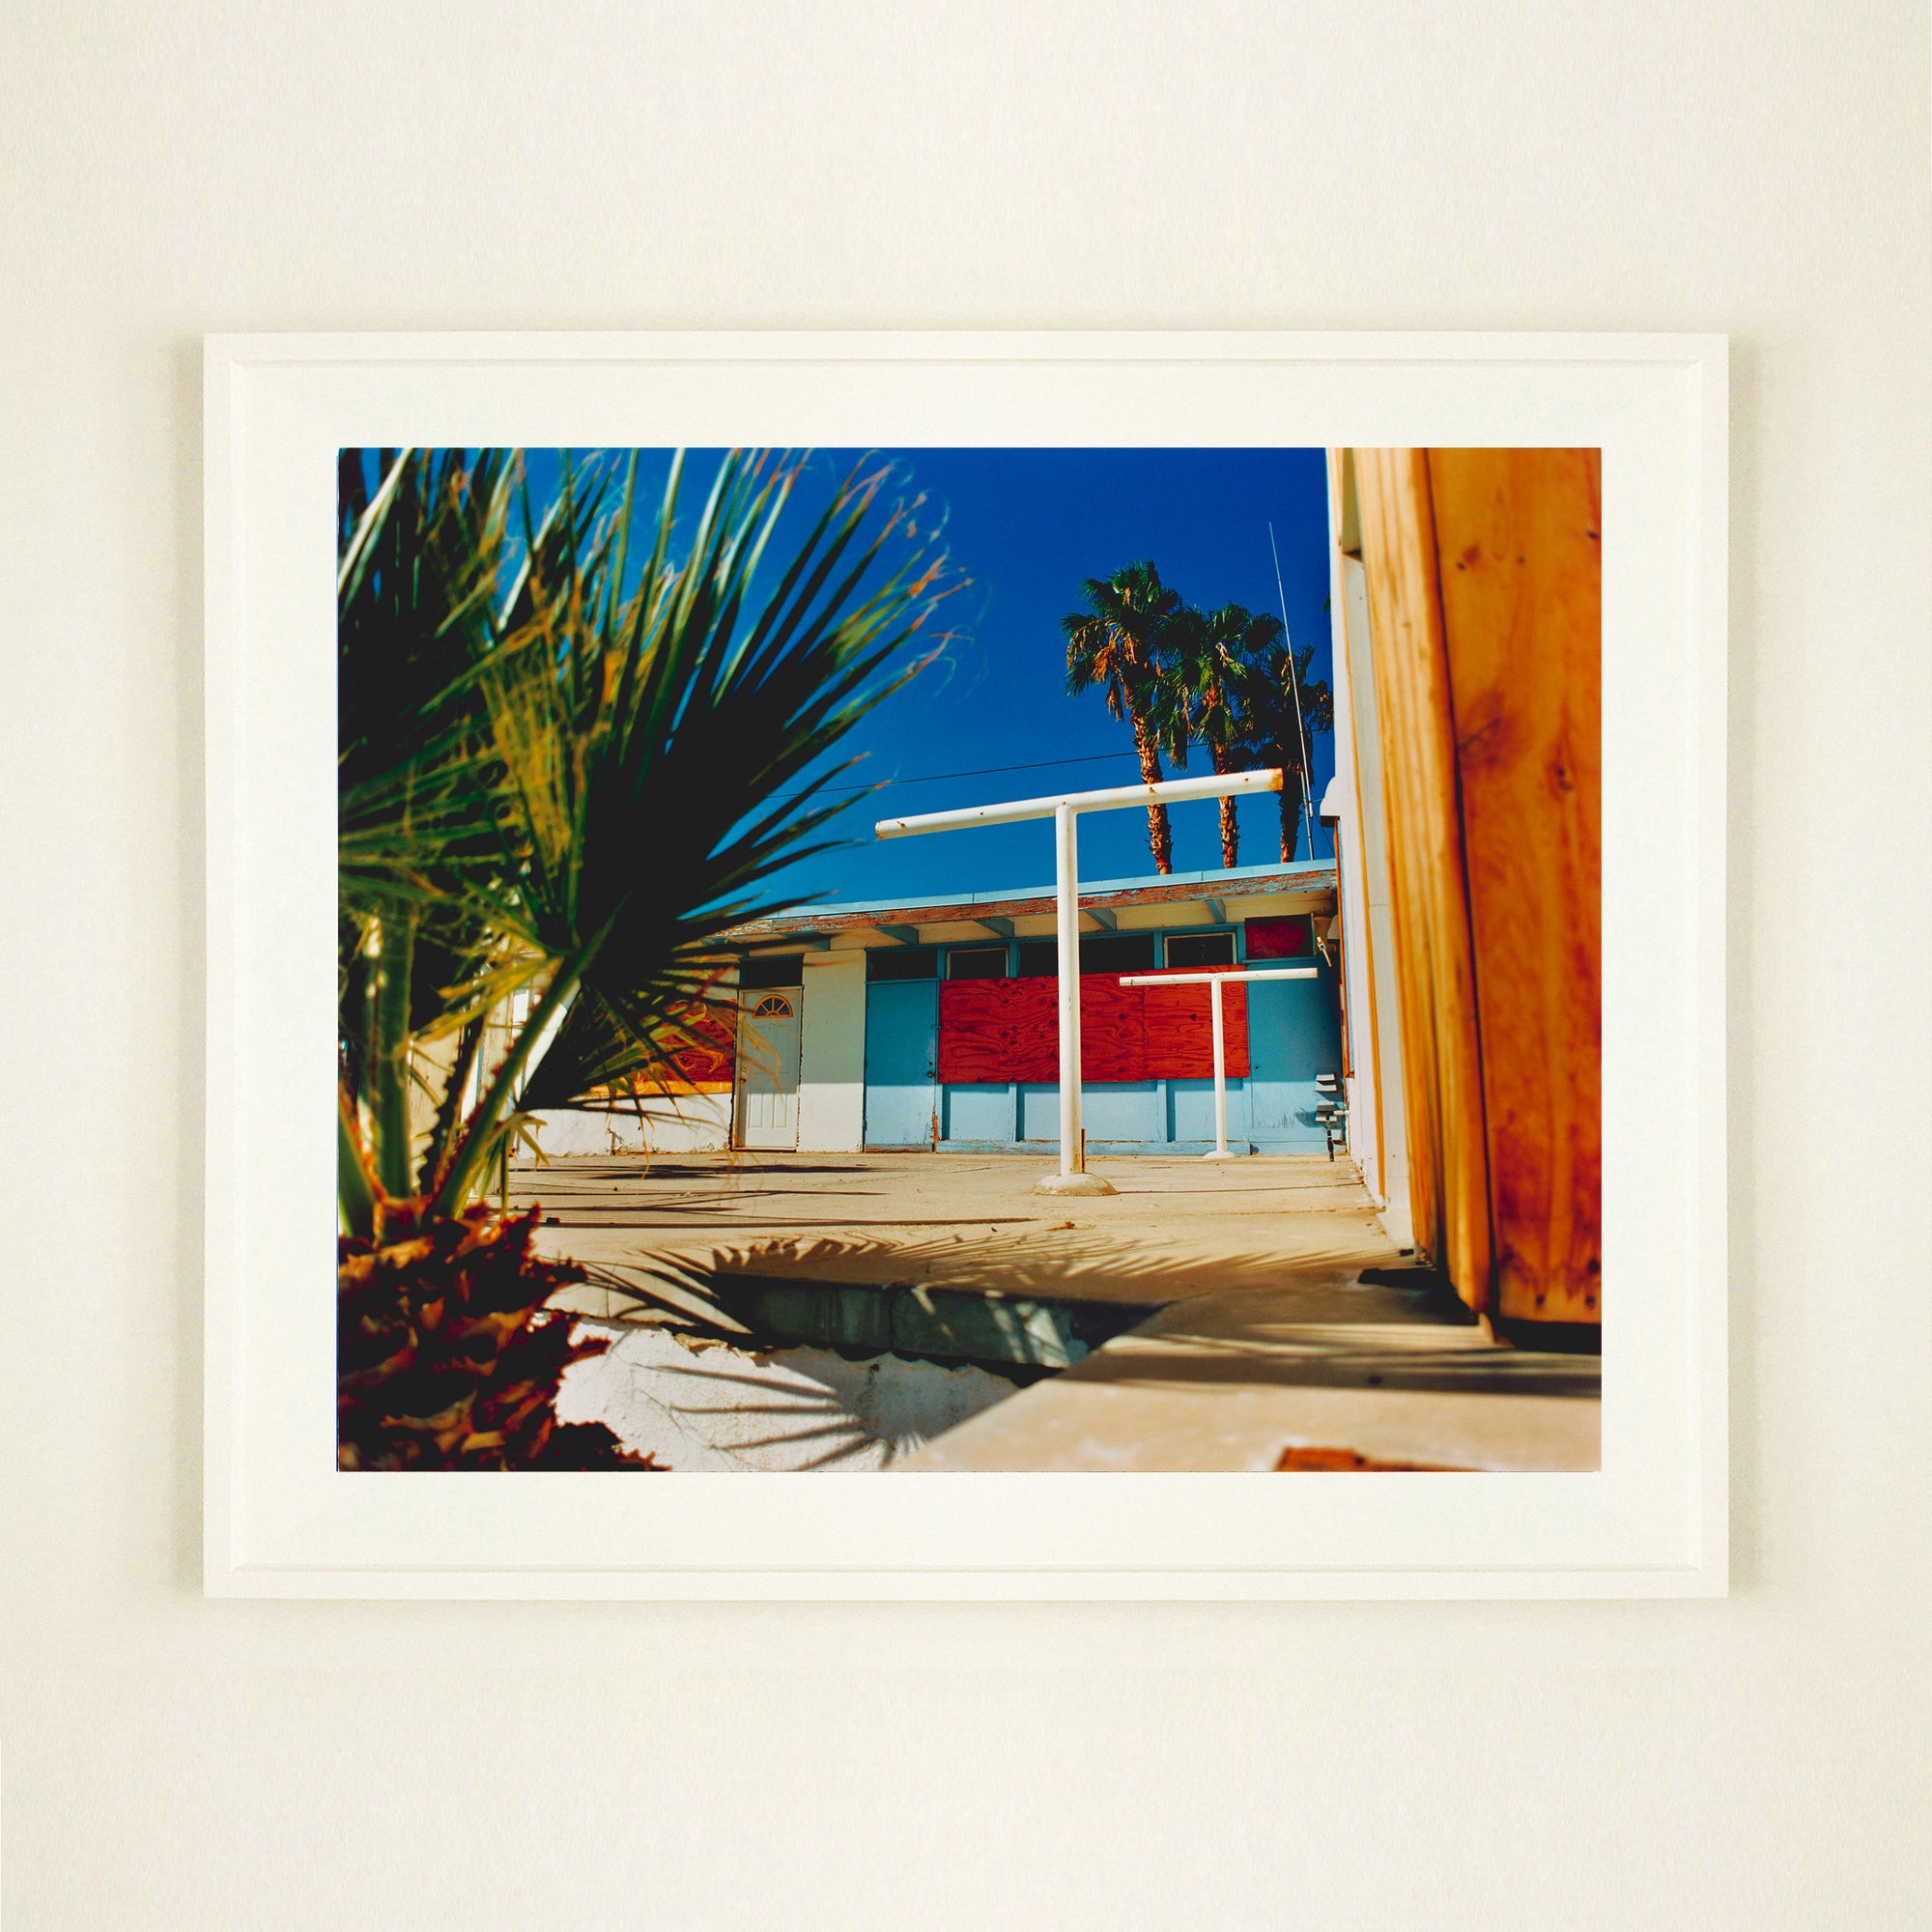 Photograph by Richard Heeps. A colourful but derelict vintage motel sits in the blue Californian sun. Palm trees appear behind and to the side. 